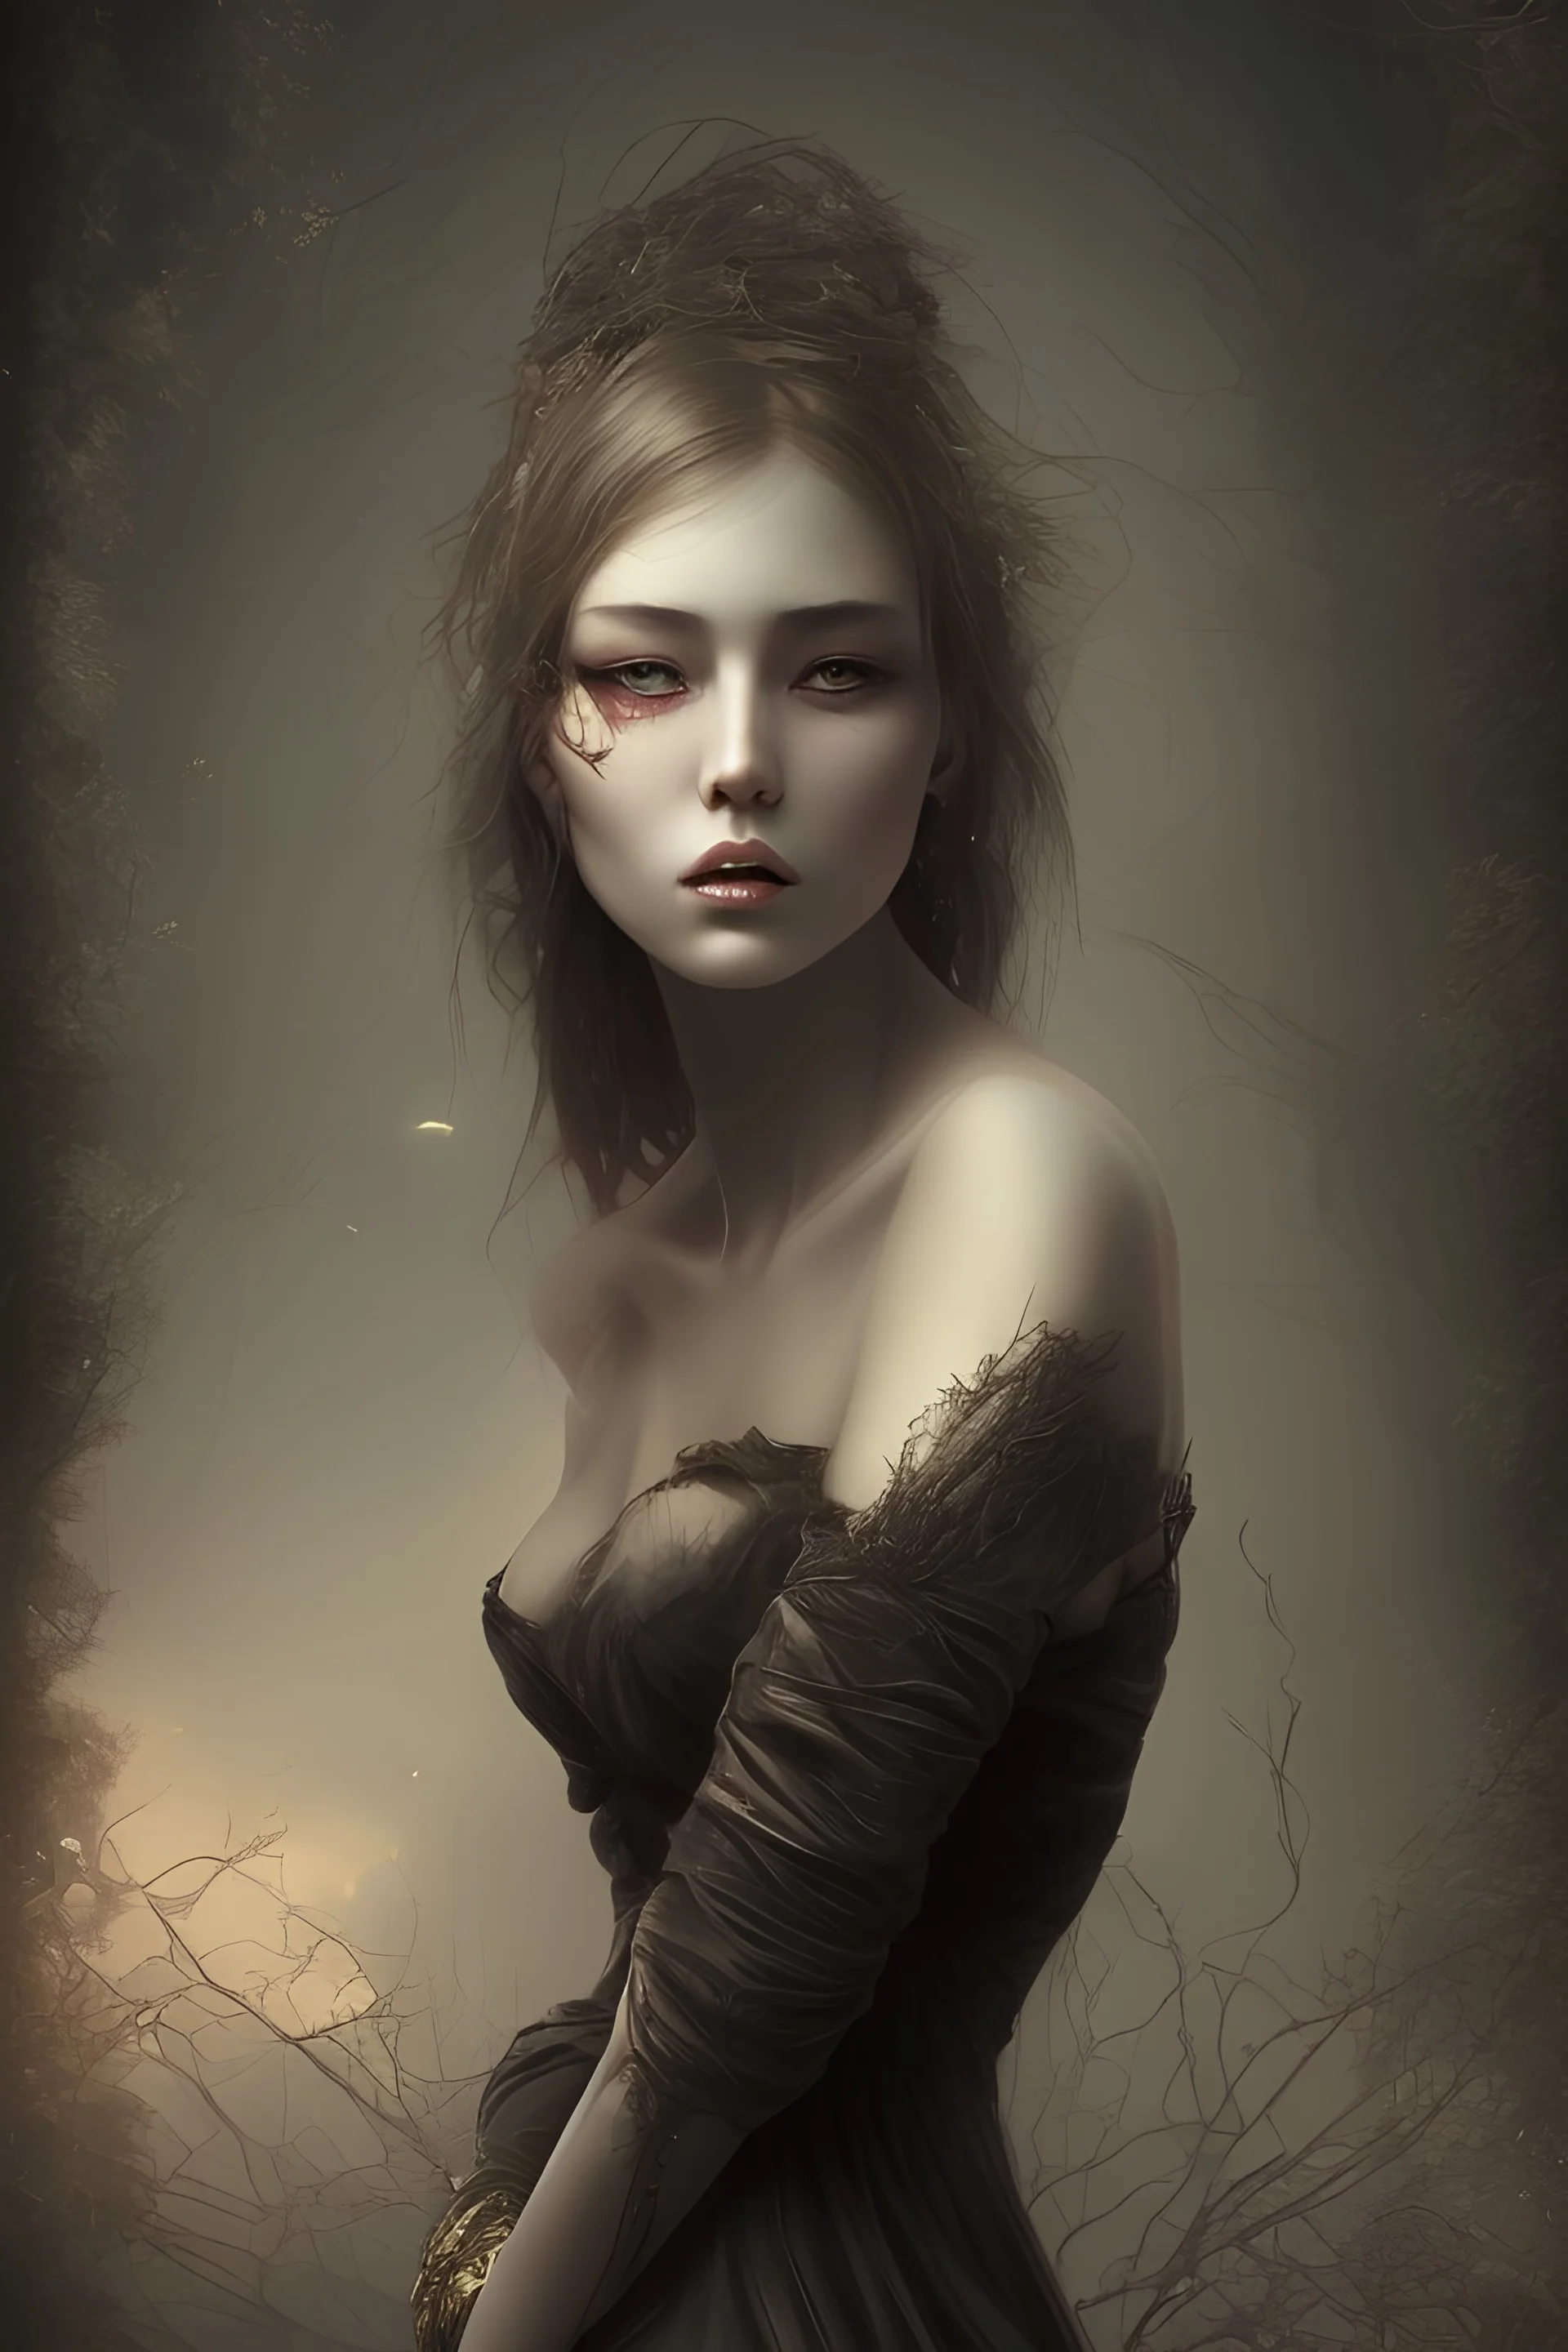 painting of a When darkness falls lonely woman wide en dept dramatic hd hightlights detailled